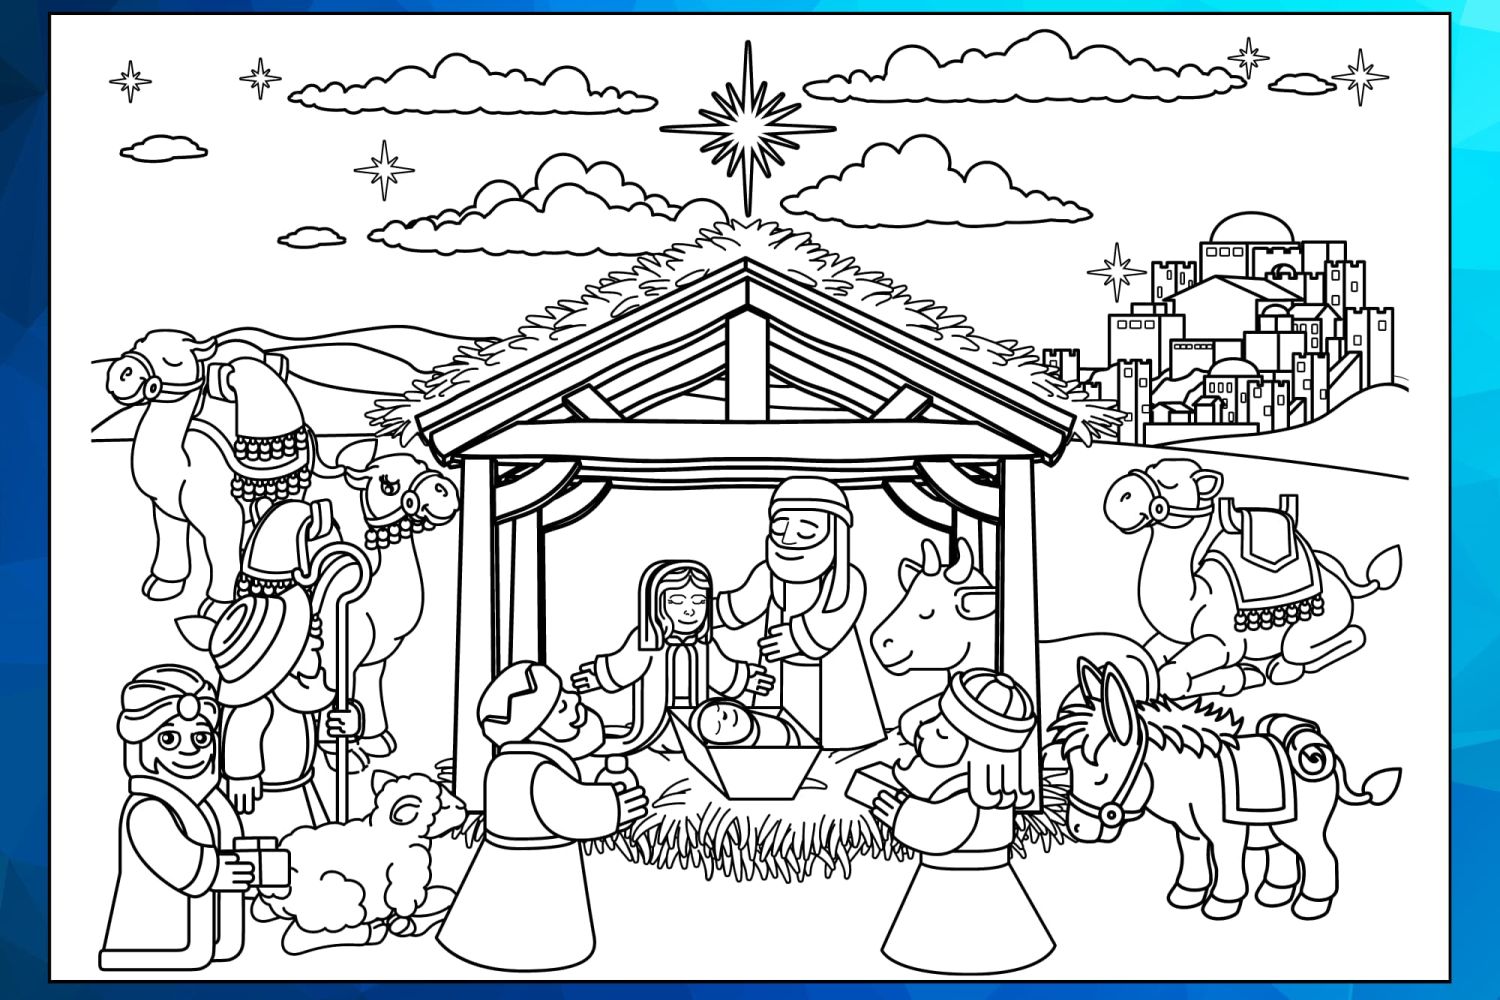 Nativity%20Scene%20Christmas%20Coloring%20Pages%20Worksheet%201-175b3fa4 Christmas: The birth of Jesus